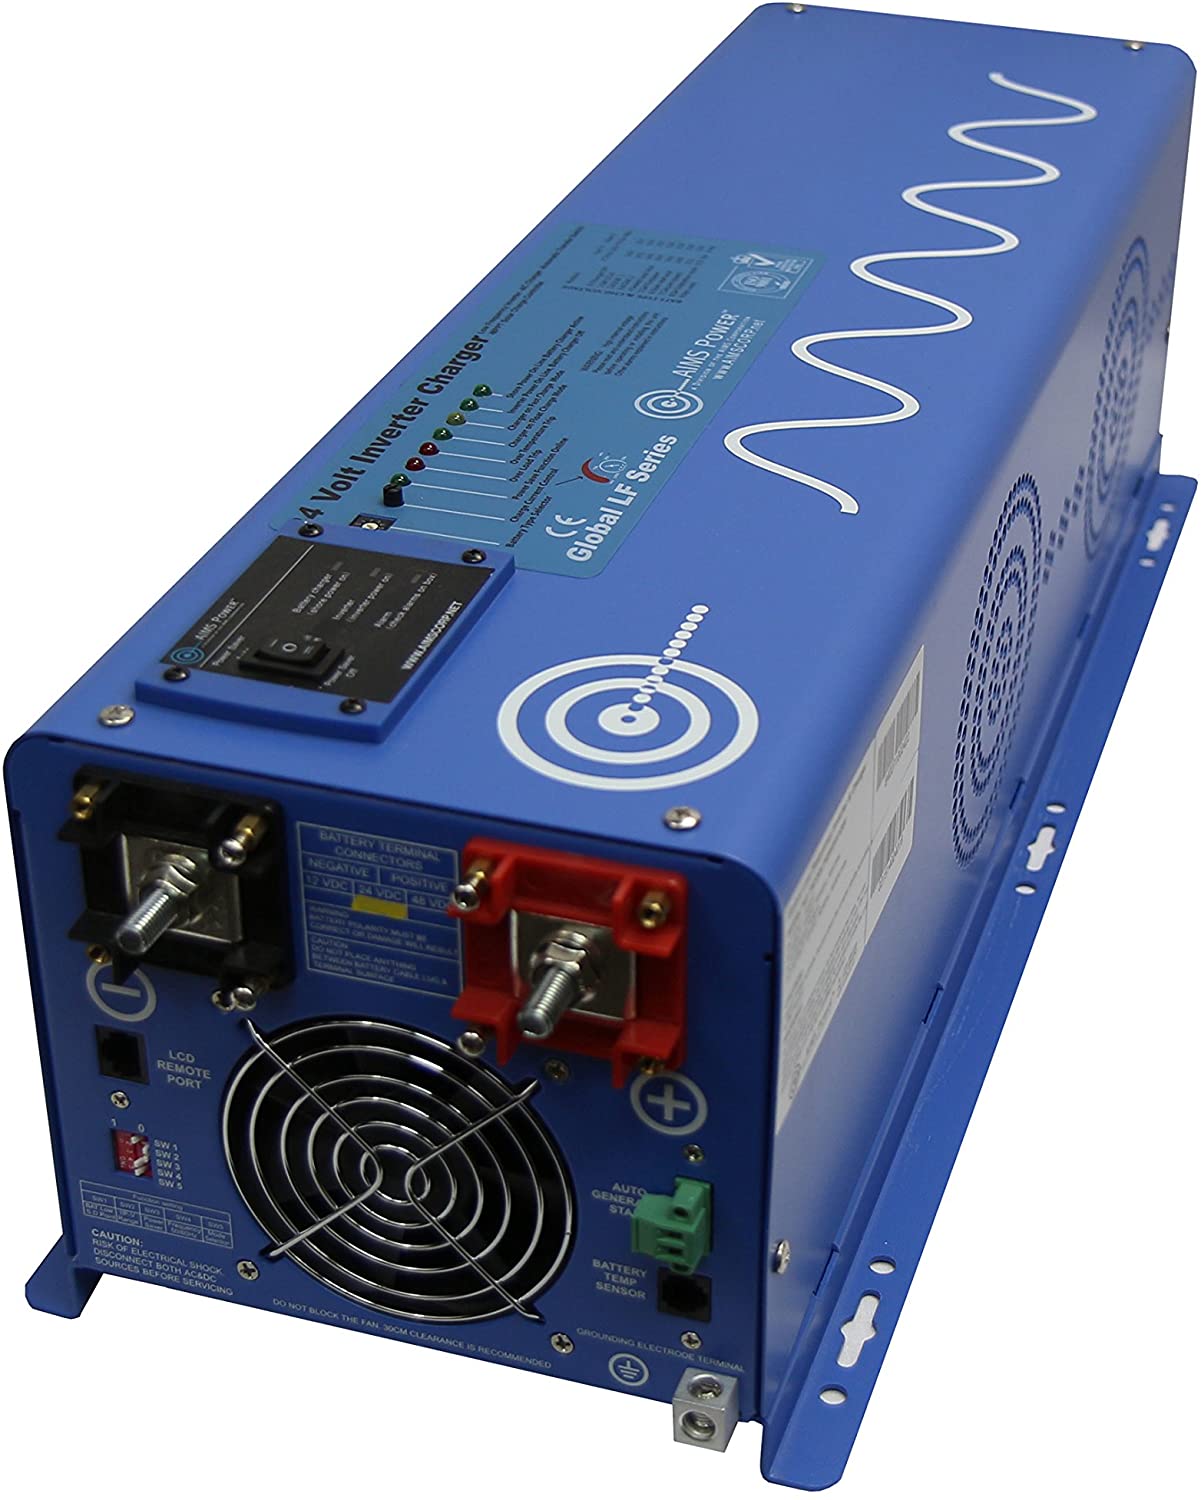 AIMS Power 6000W Pure Sine Inverter Charger